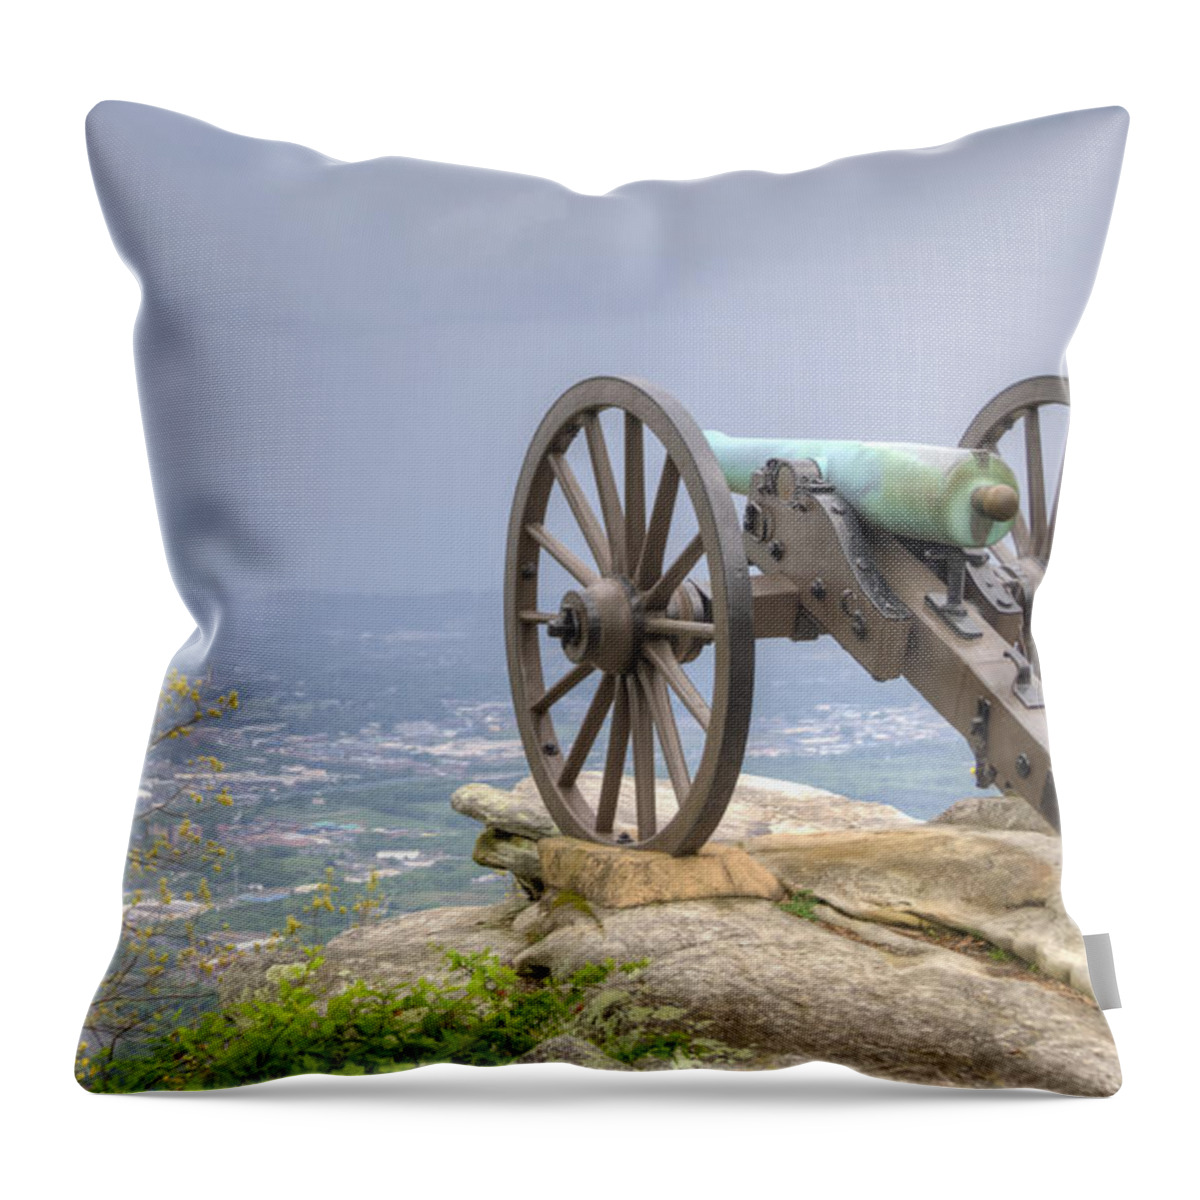 Cannon Throw Pillow featuring the photograph Cannon 2 by David Troxel